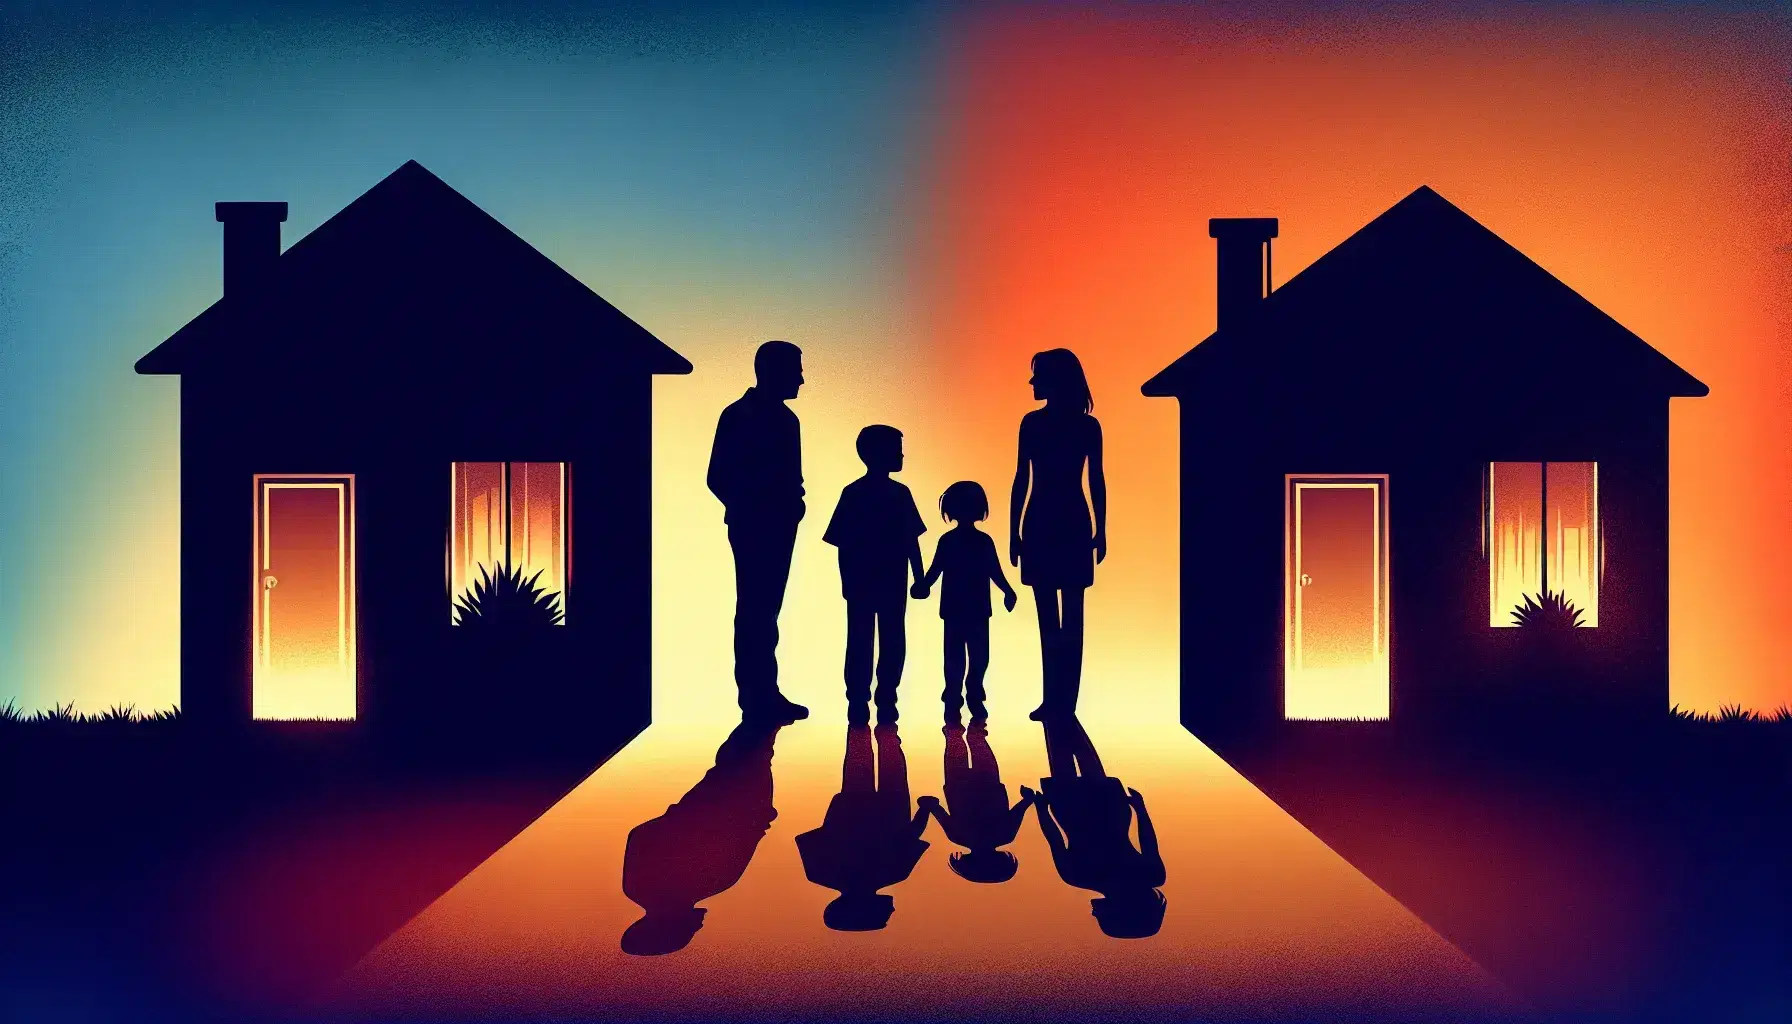 Family divided in silhouette with two adults and children in front of separate houses on orange to blue gradient background.